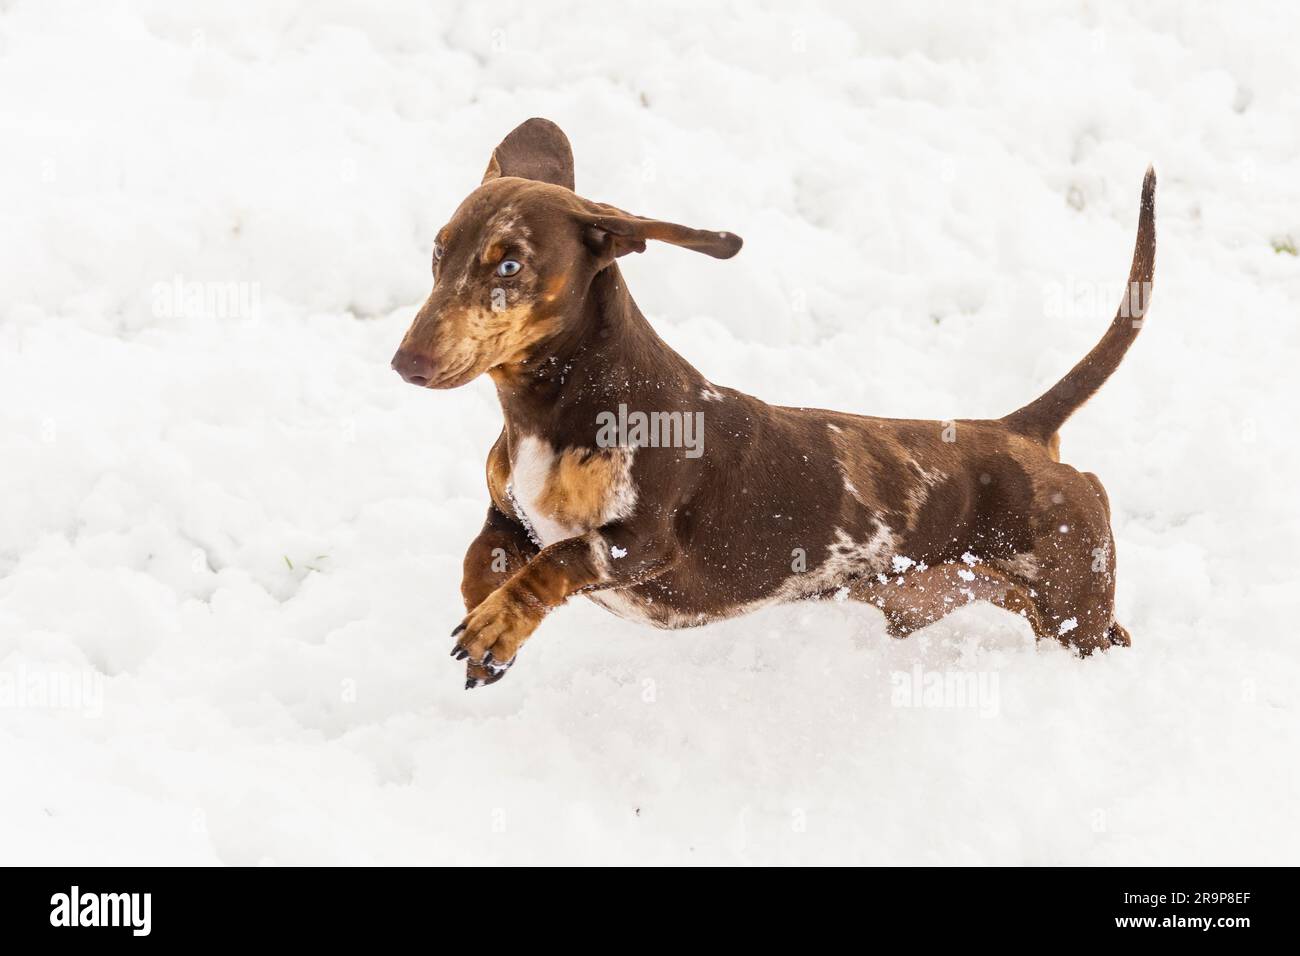 Short-haired brindle Dachshund. Adult male running in snow. Germany Stock Photo